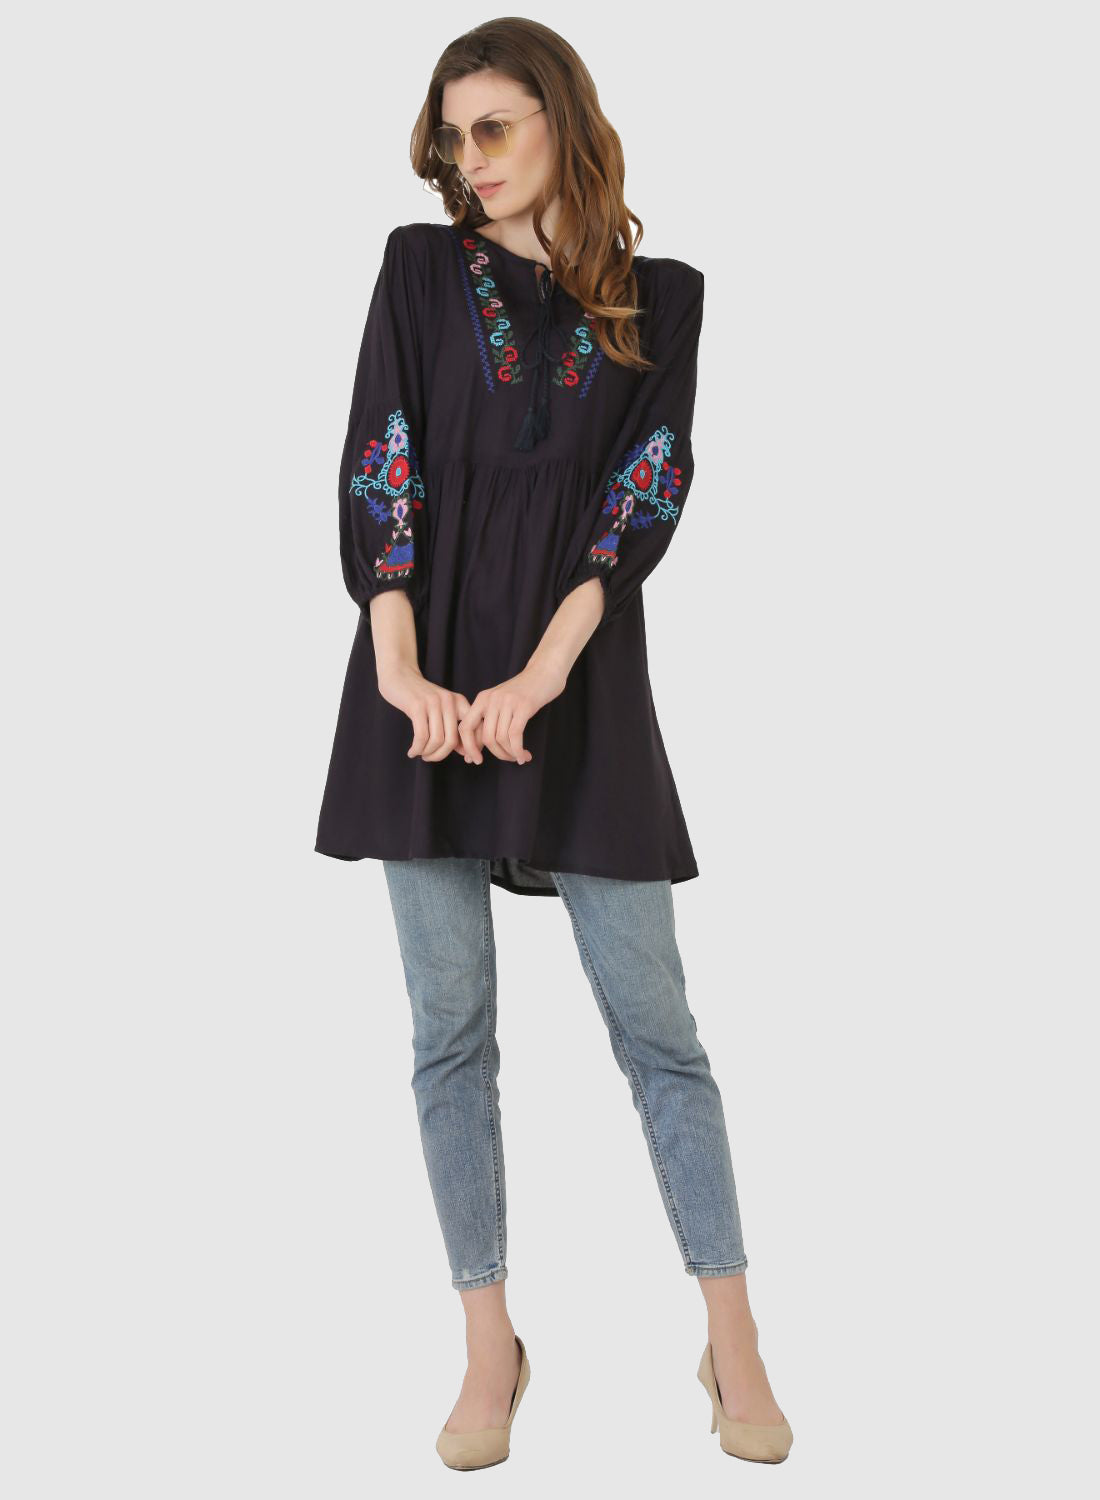 Women Top Navy Blue Regular Fit and Flare Puff Sleeve Embroidery Work